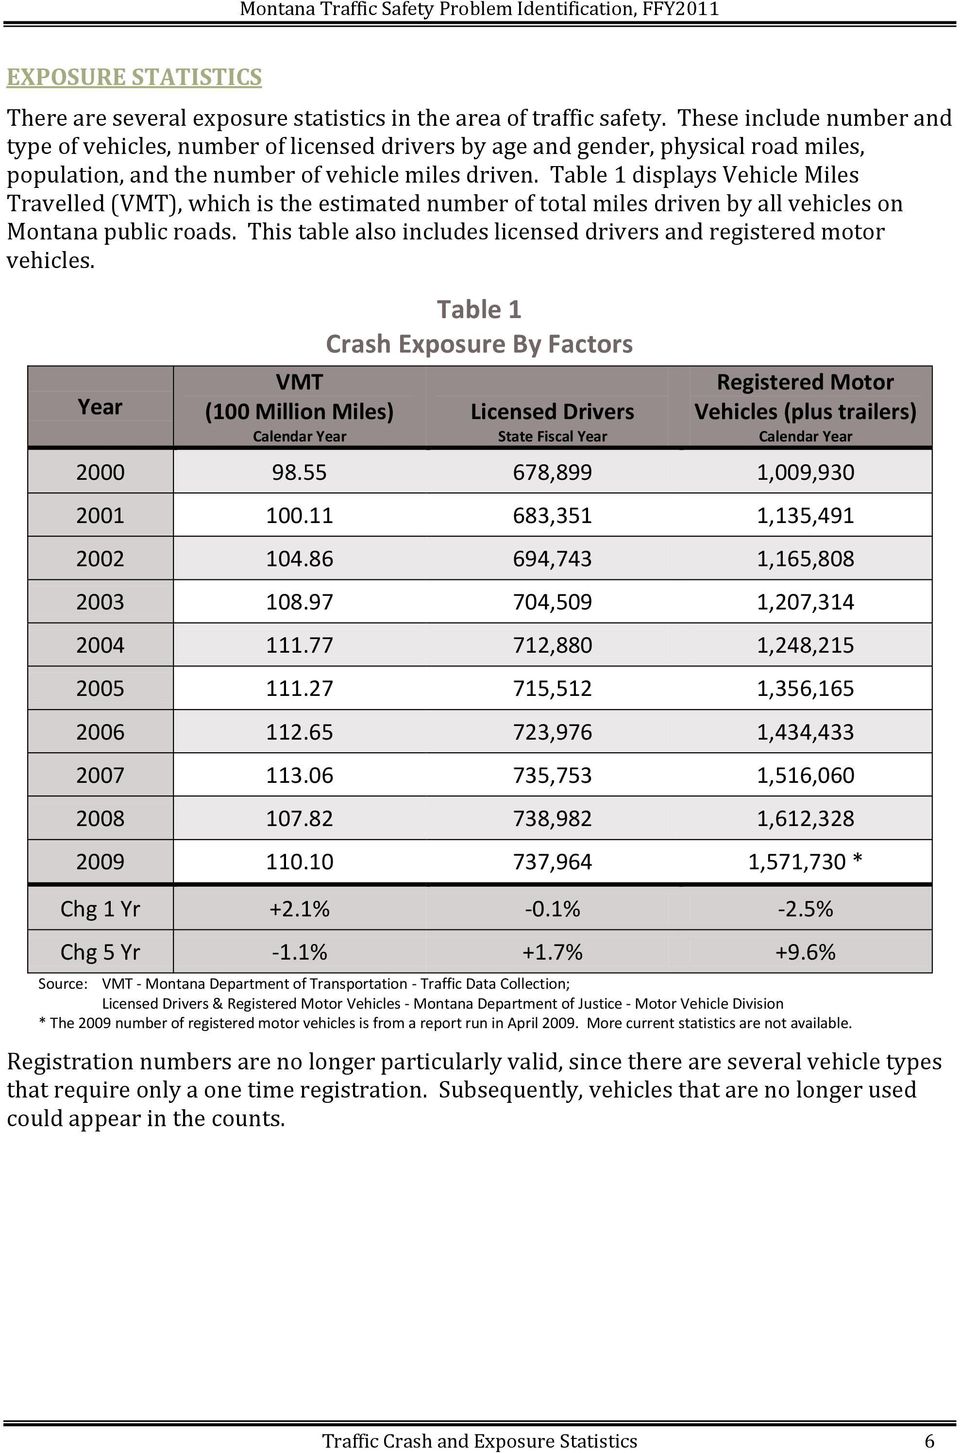 Table 1 displays Vehicle Miles Travelled (VMT), which is the estimated number of total miles driven by all vehicles on Montana public roads.